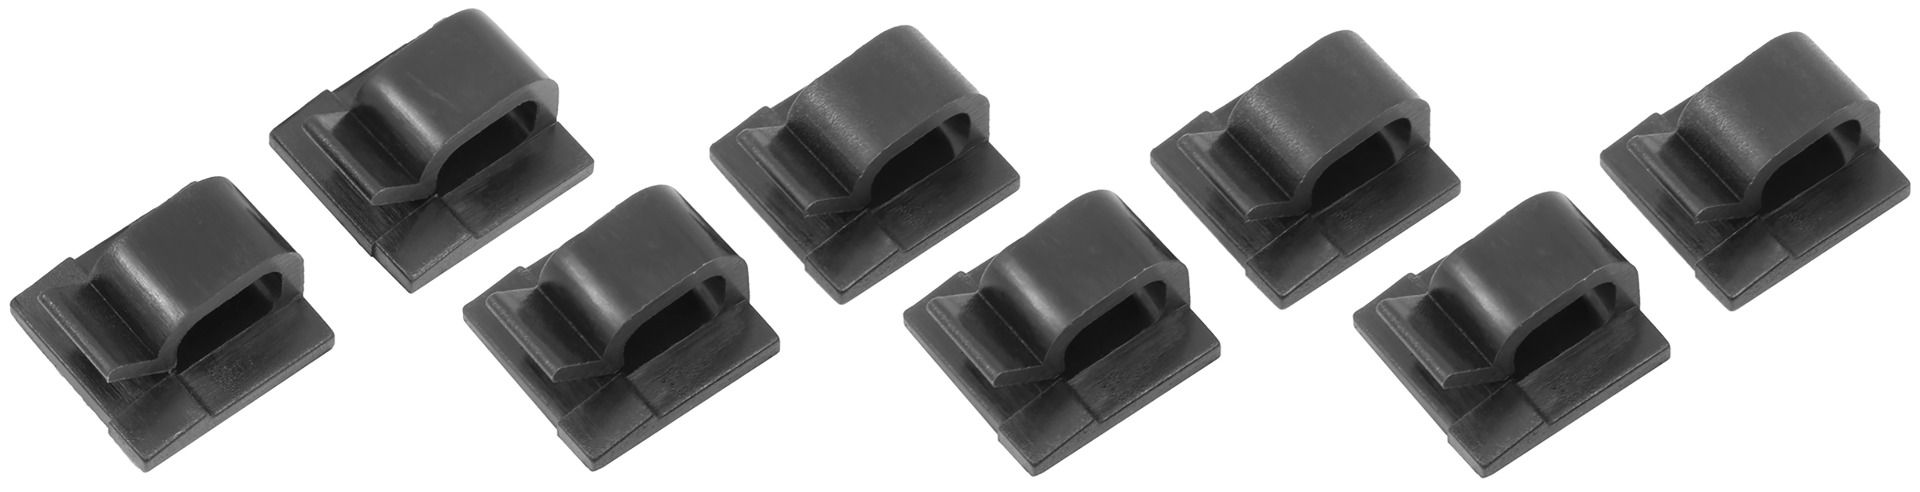 Brodit adhesive cable clips (8-pack) max.3.5mm thickness